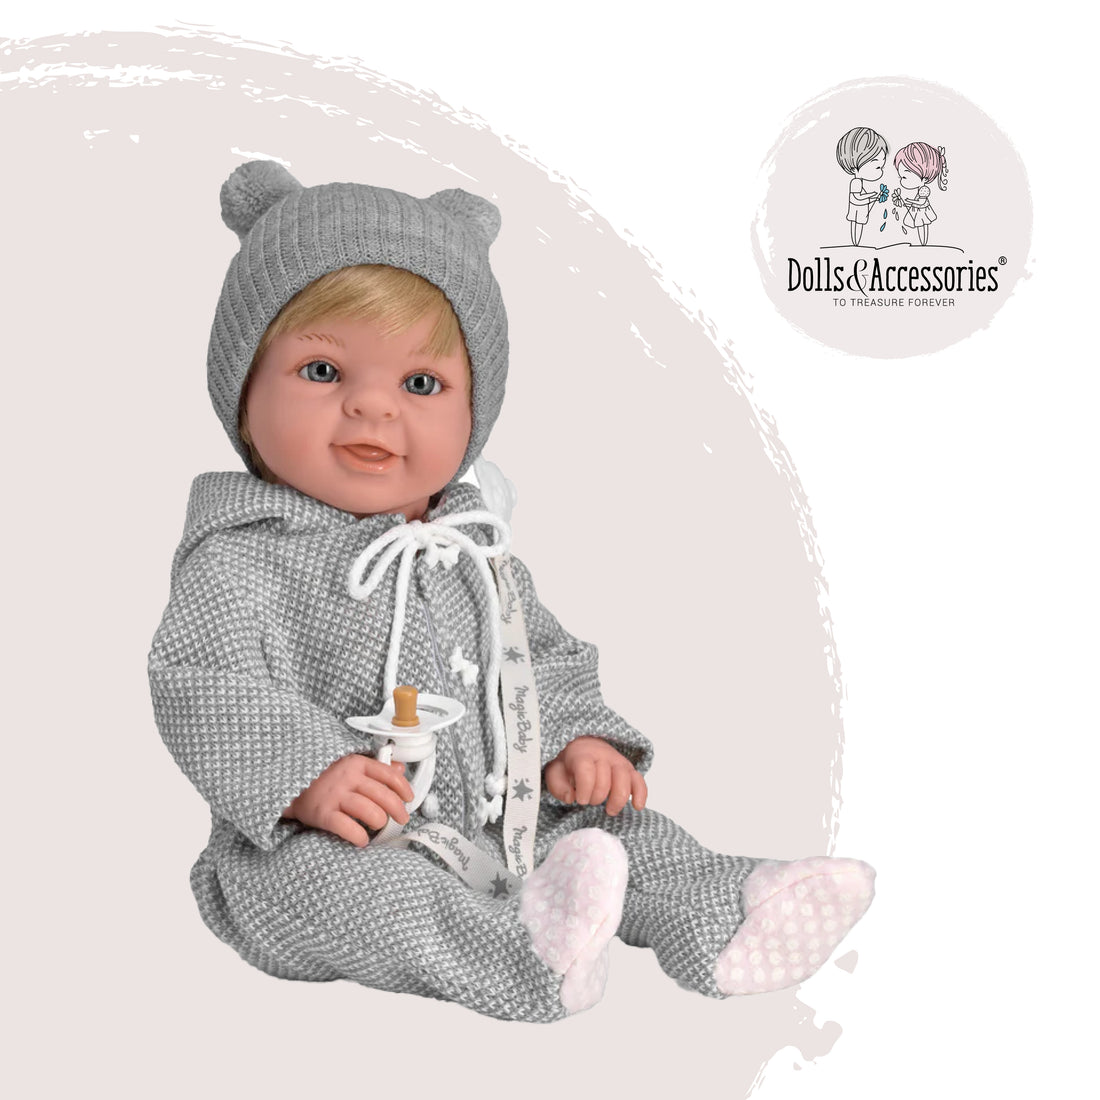 Handcrafted Paula Collection Magic Baby Doll (46514) by LAMAGIK